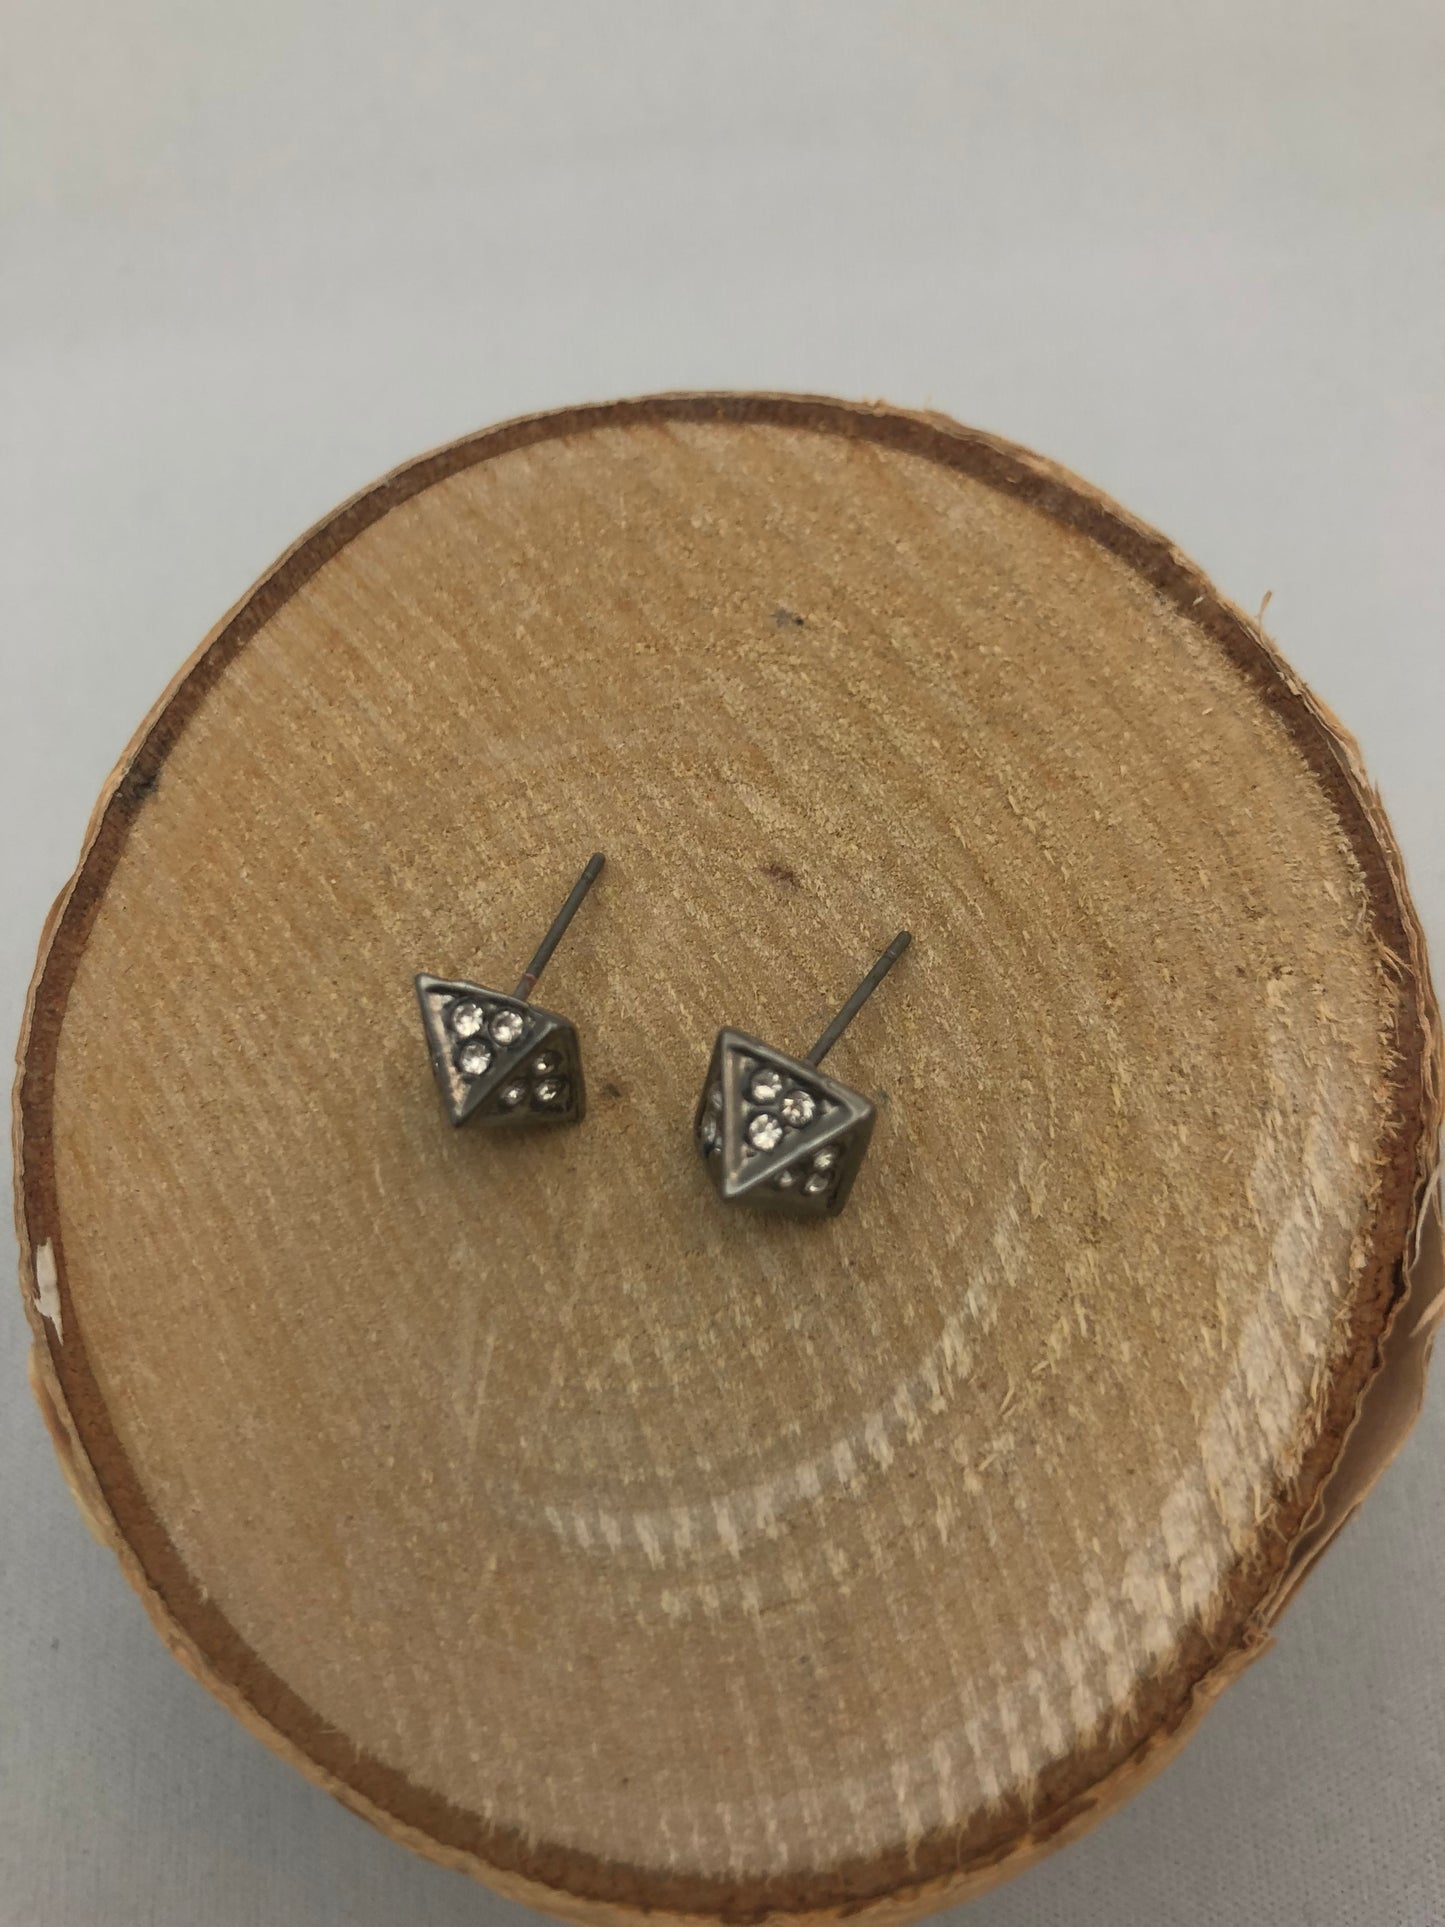 Pewter Silver Pyramids Studs - Le Prix Fashion & Consulting